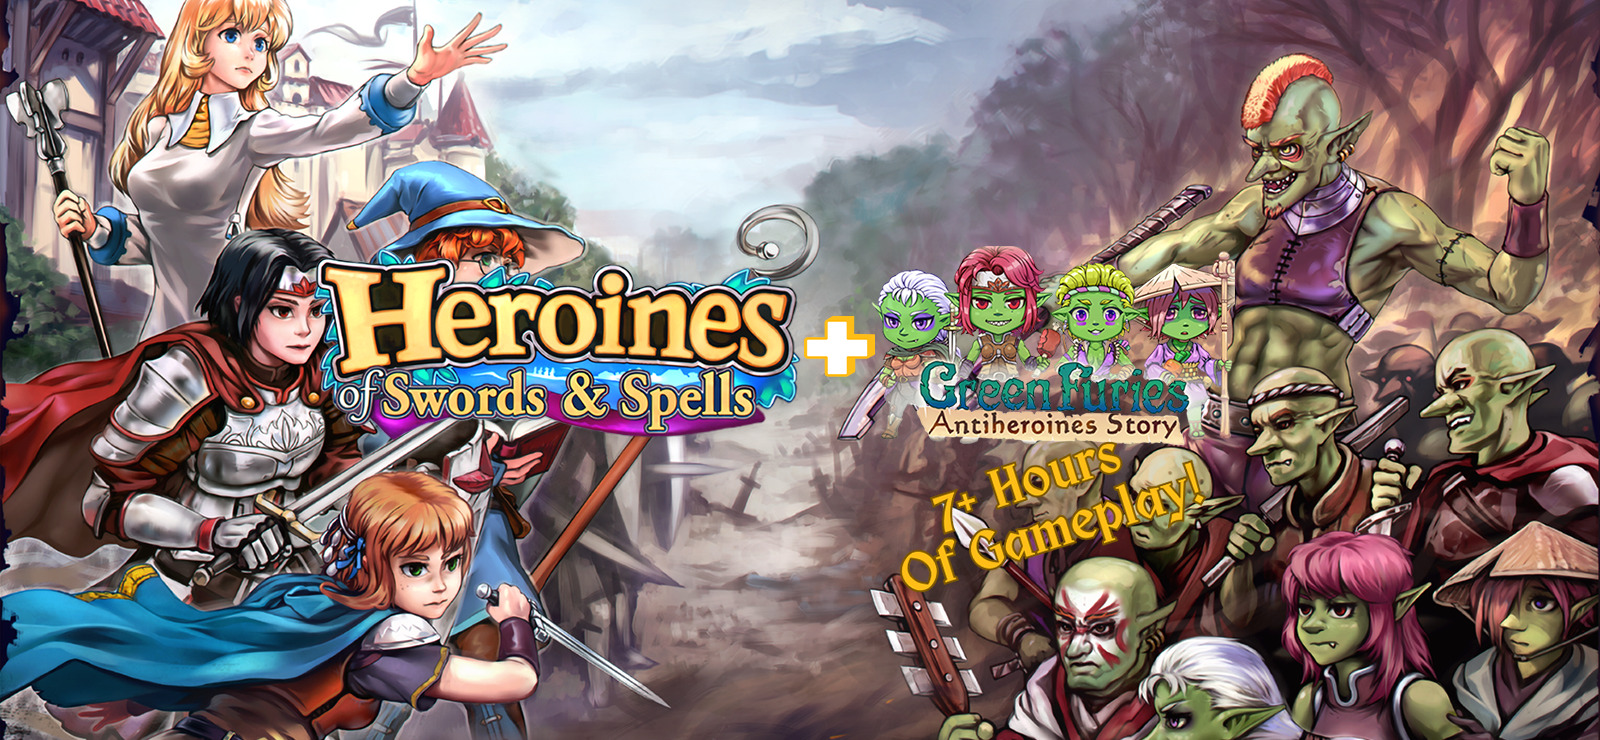 download the new version for iphoneHeroines of Swords & Spells + Green Furies DLC